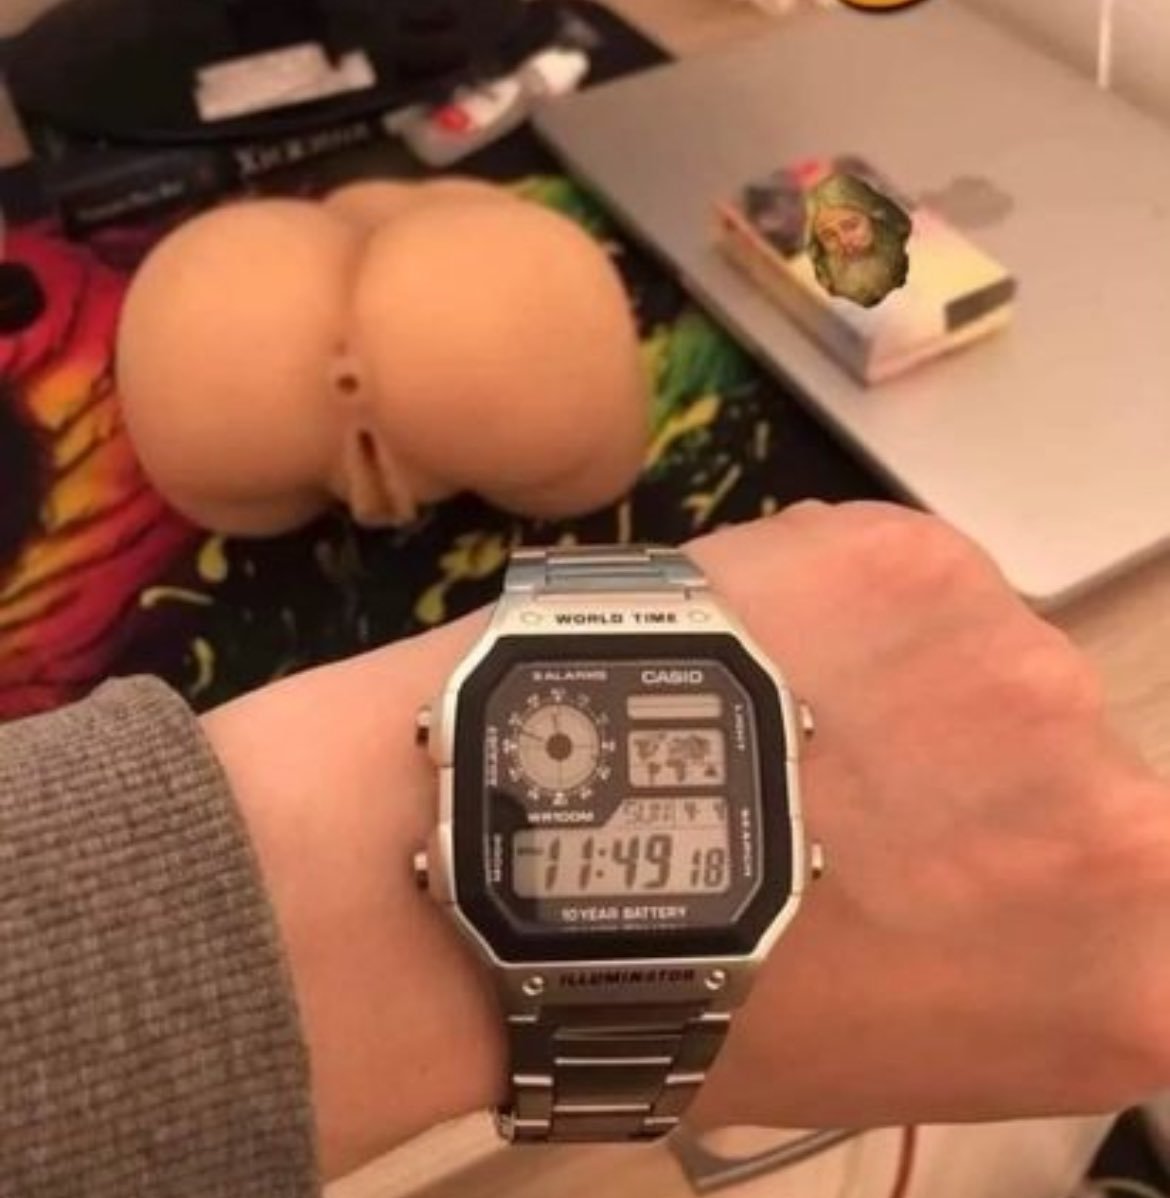 just got my new watch today